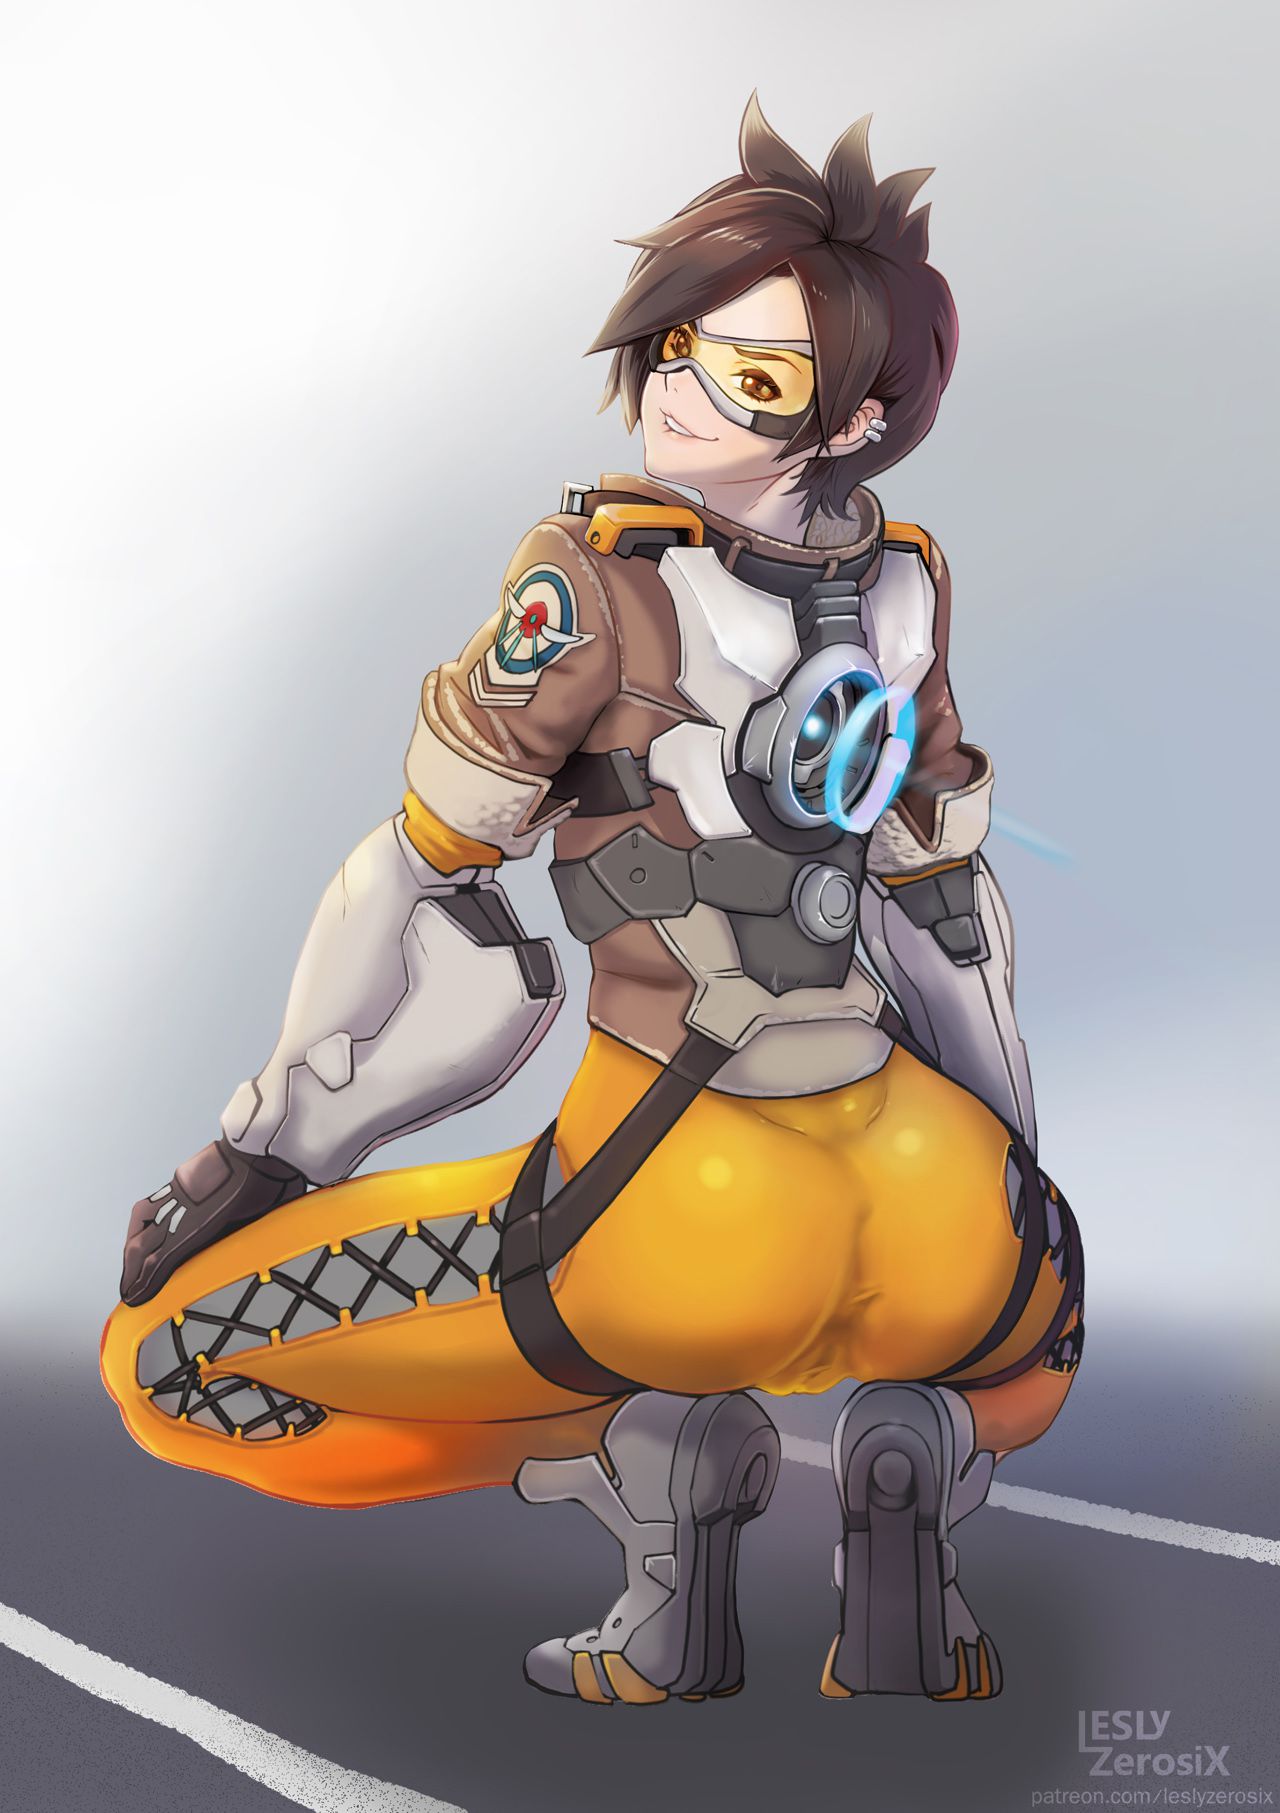 [Over-watch] Tracer photo gallery Wwww Part2 6